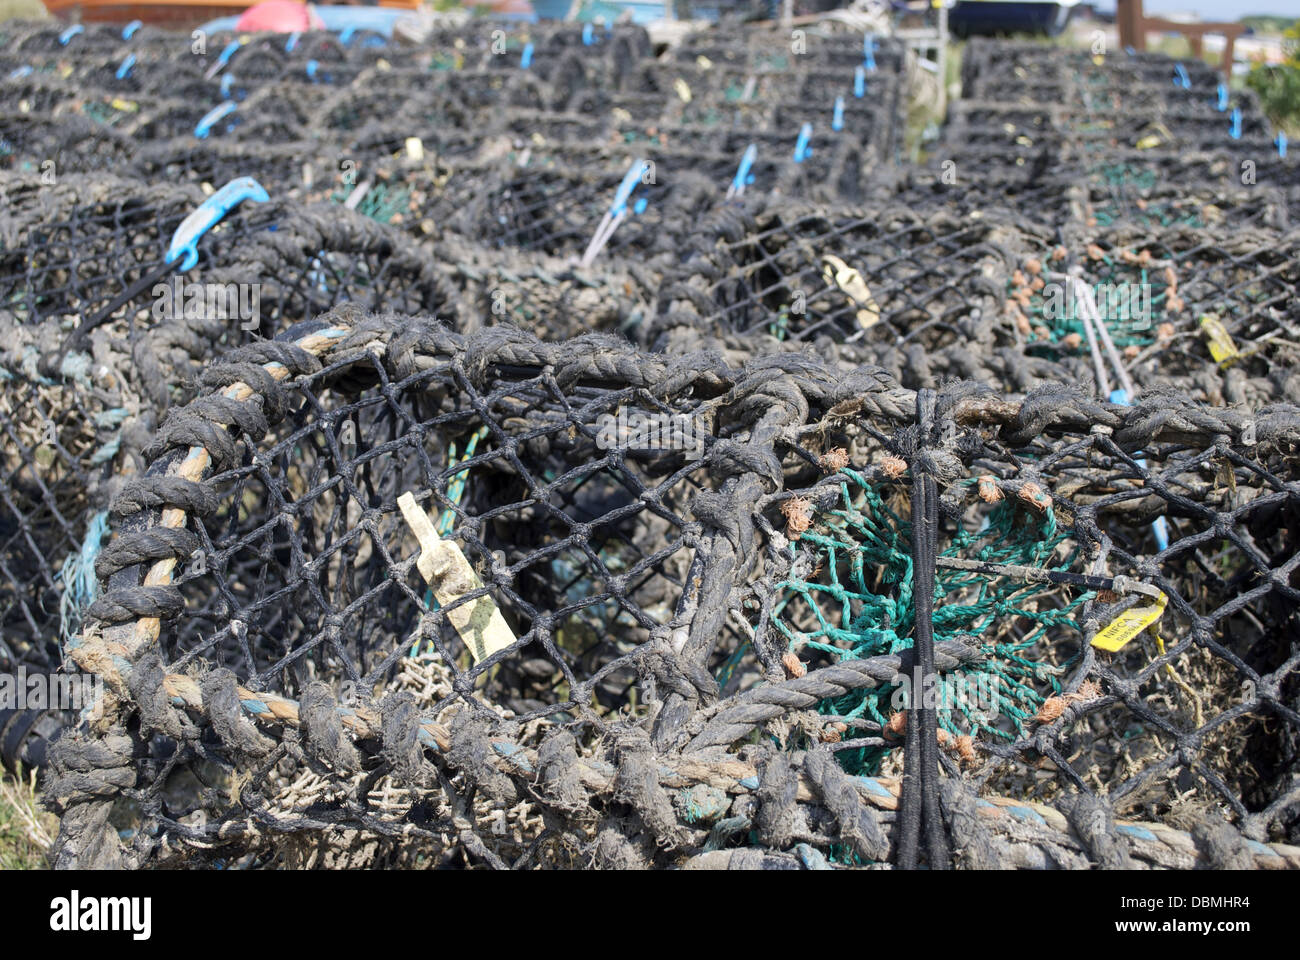 Lobster pots in rows Stock Photo